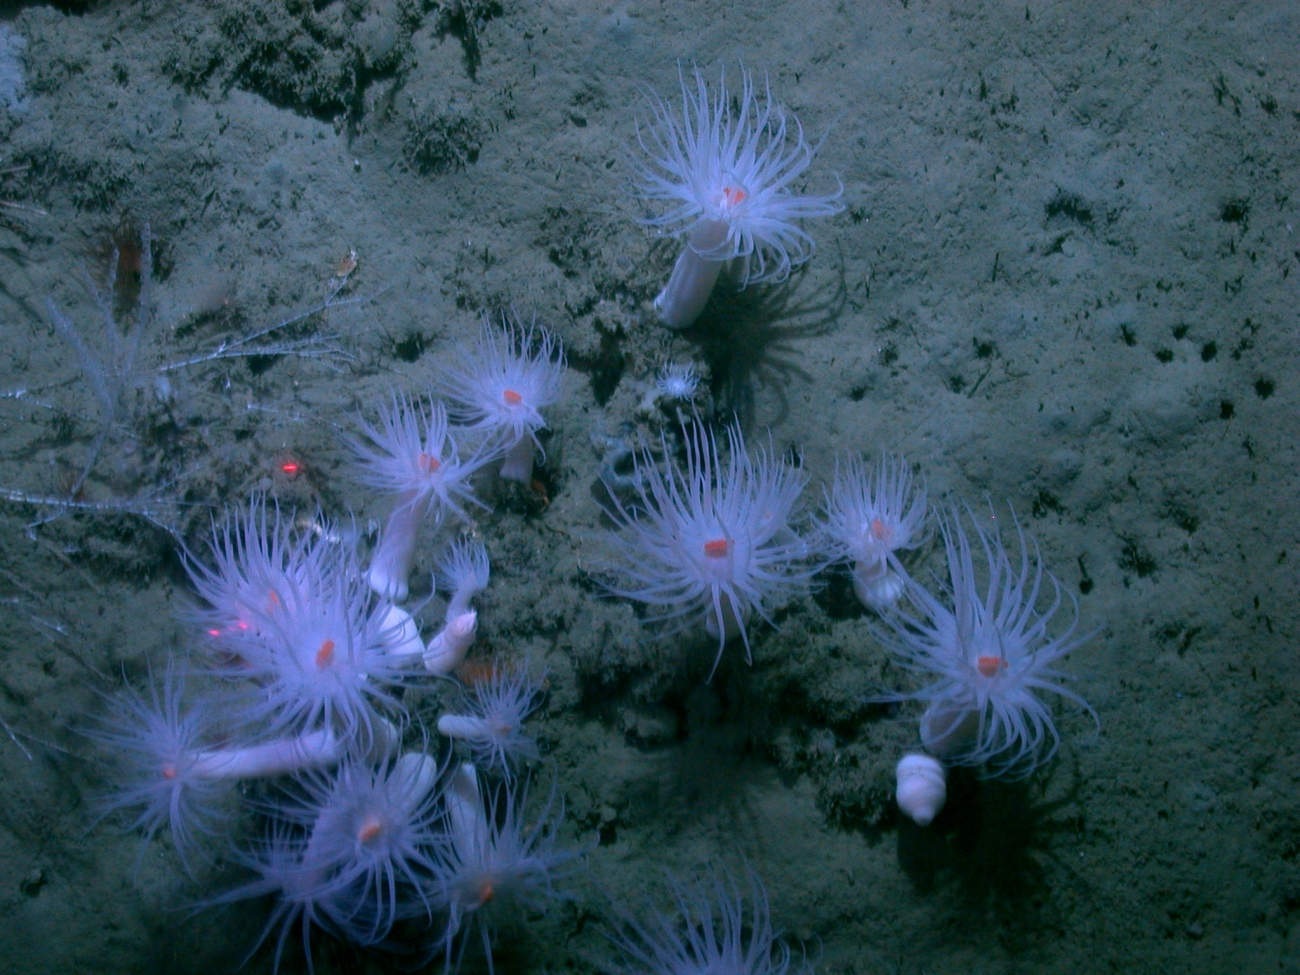 A number of large white anemones and bamboo coral on left center